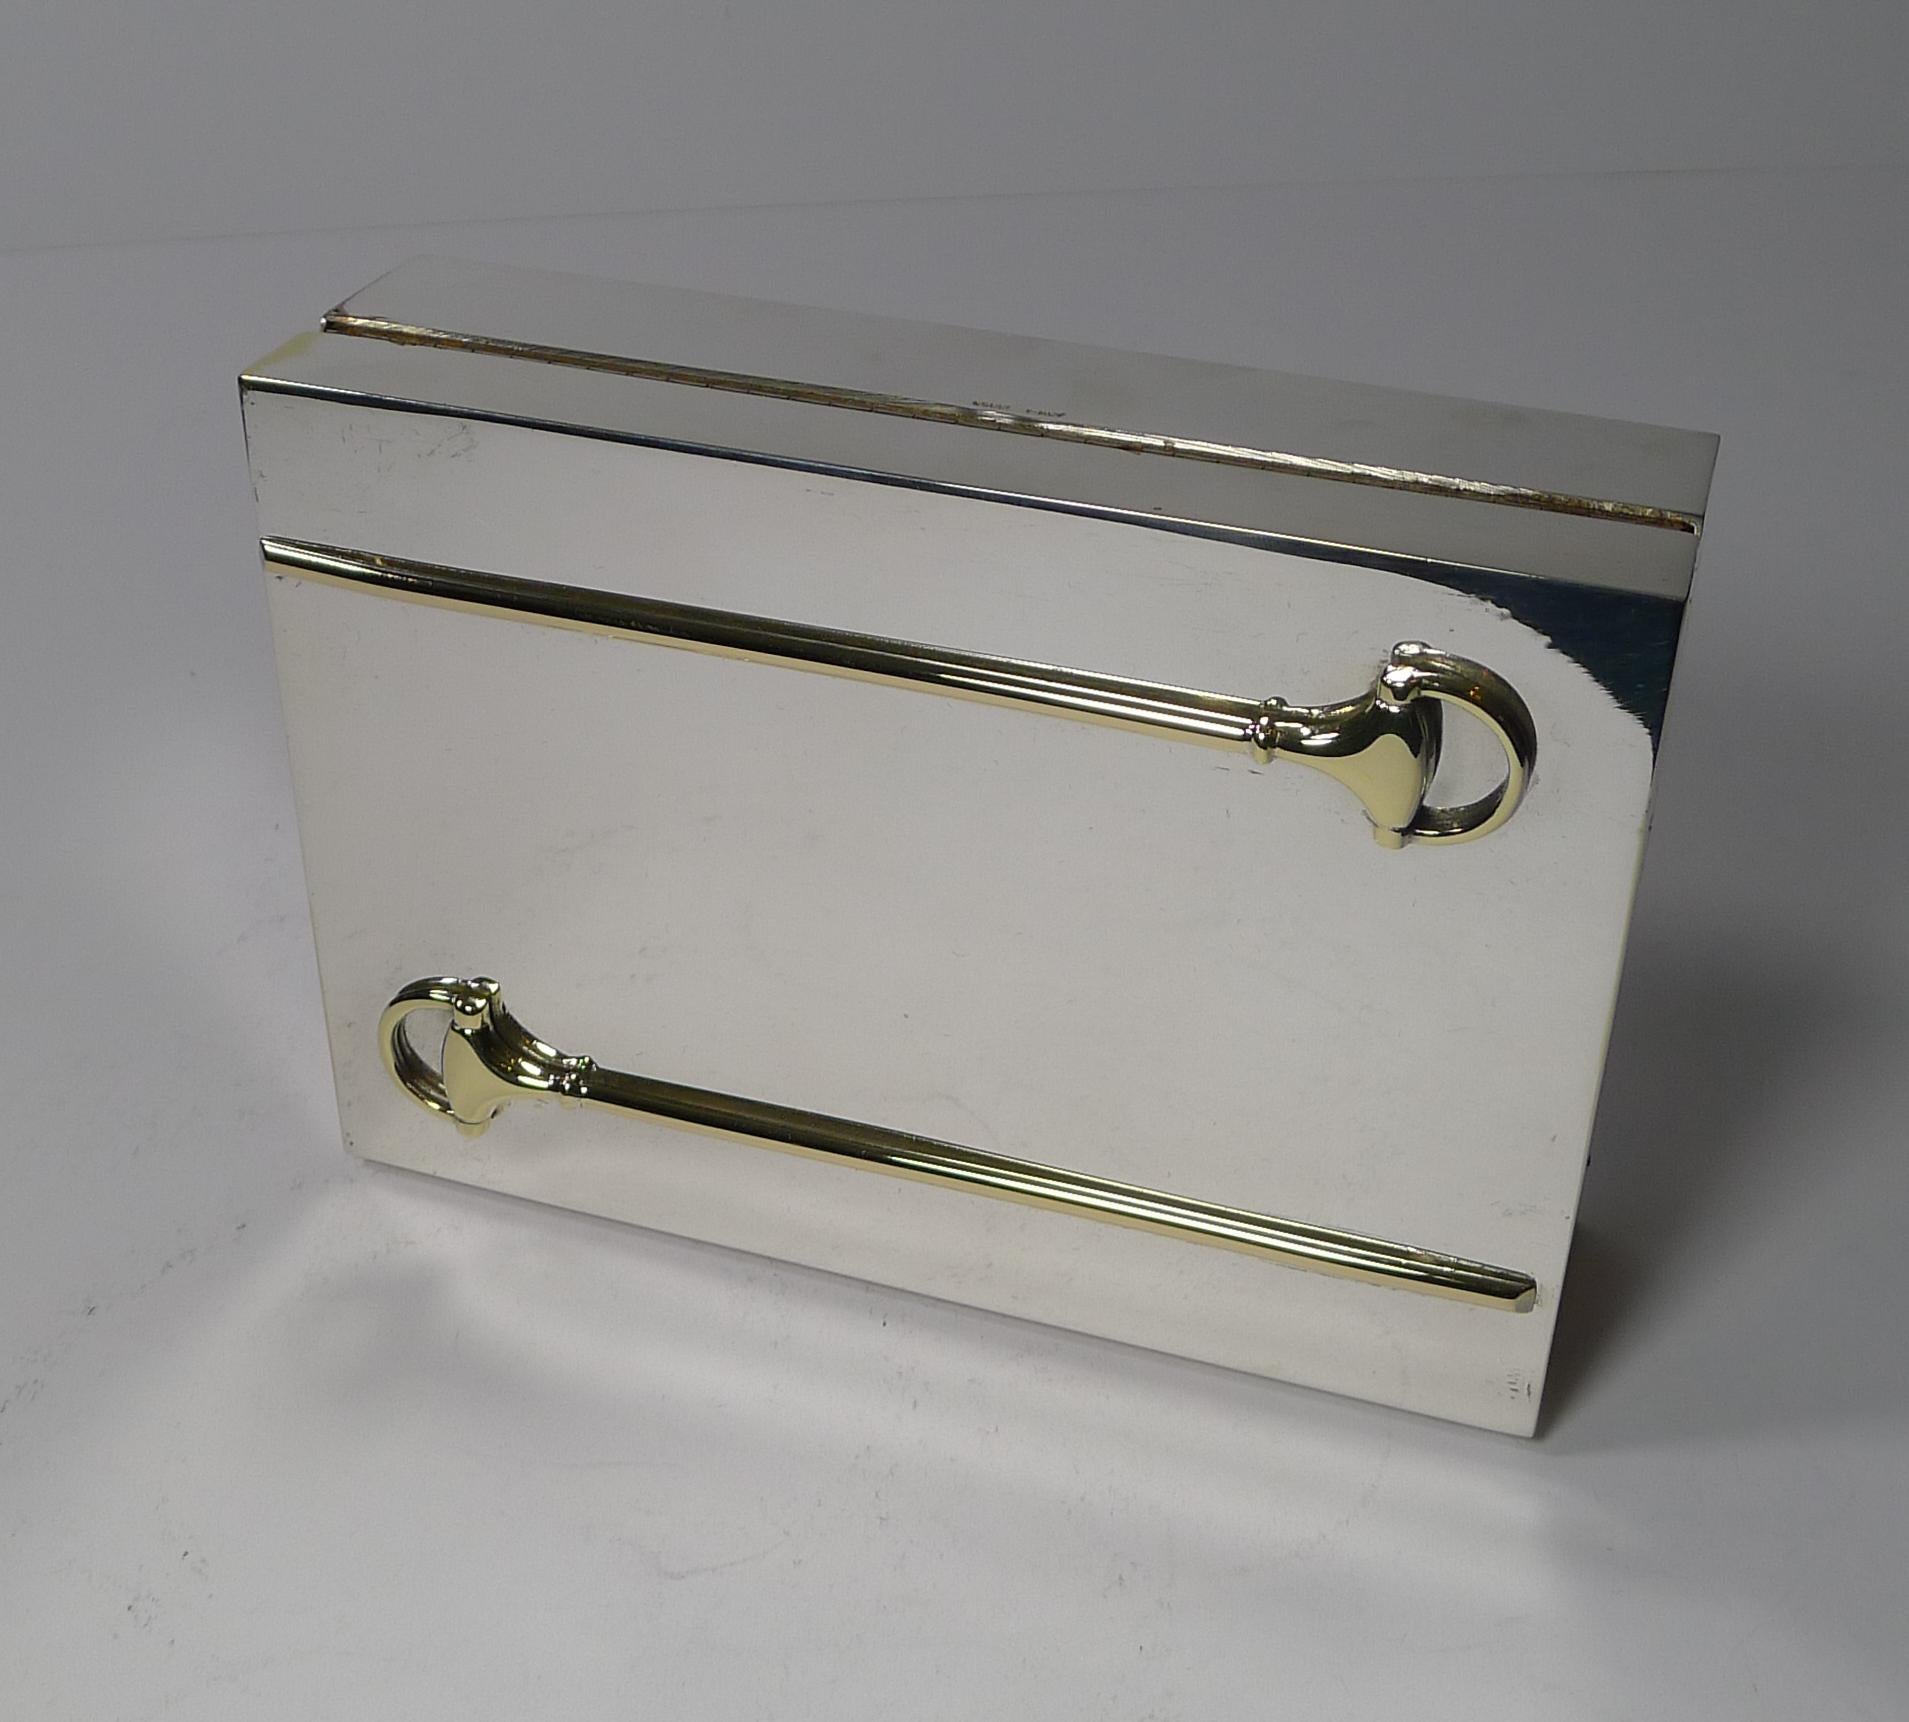 A highly sought-after vintage Gucci box professionally cleaned and polished in our silversmith's workshop, restoring it to its former glory.

The interior retains the original wooden lining and the box is stamped 